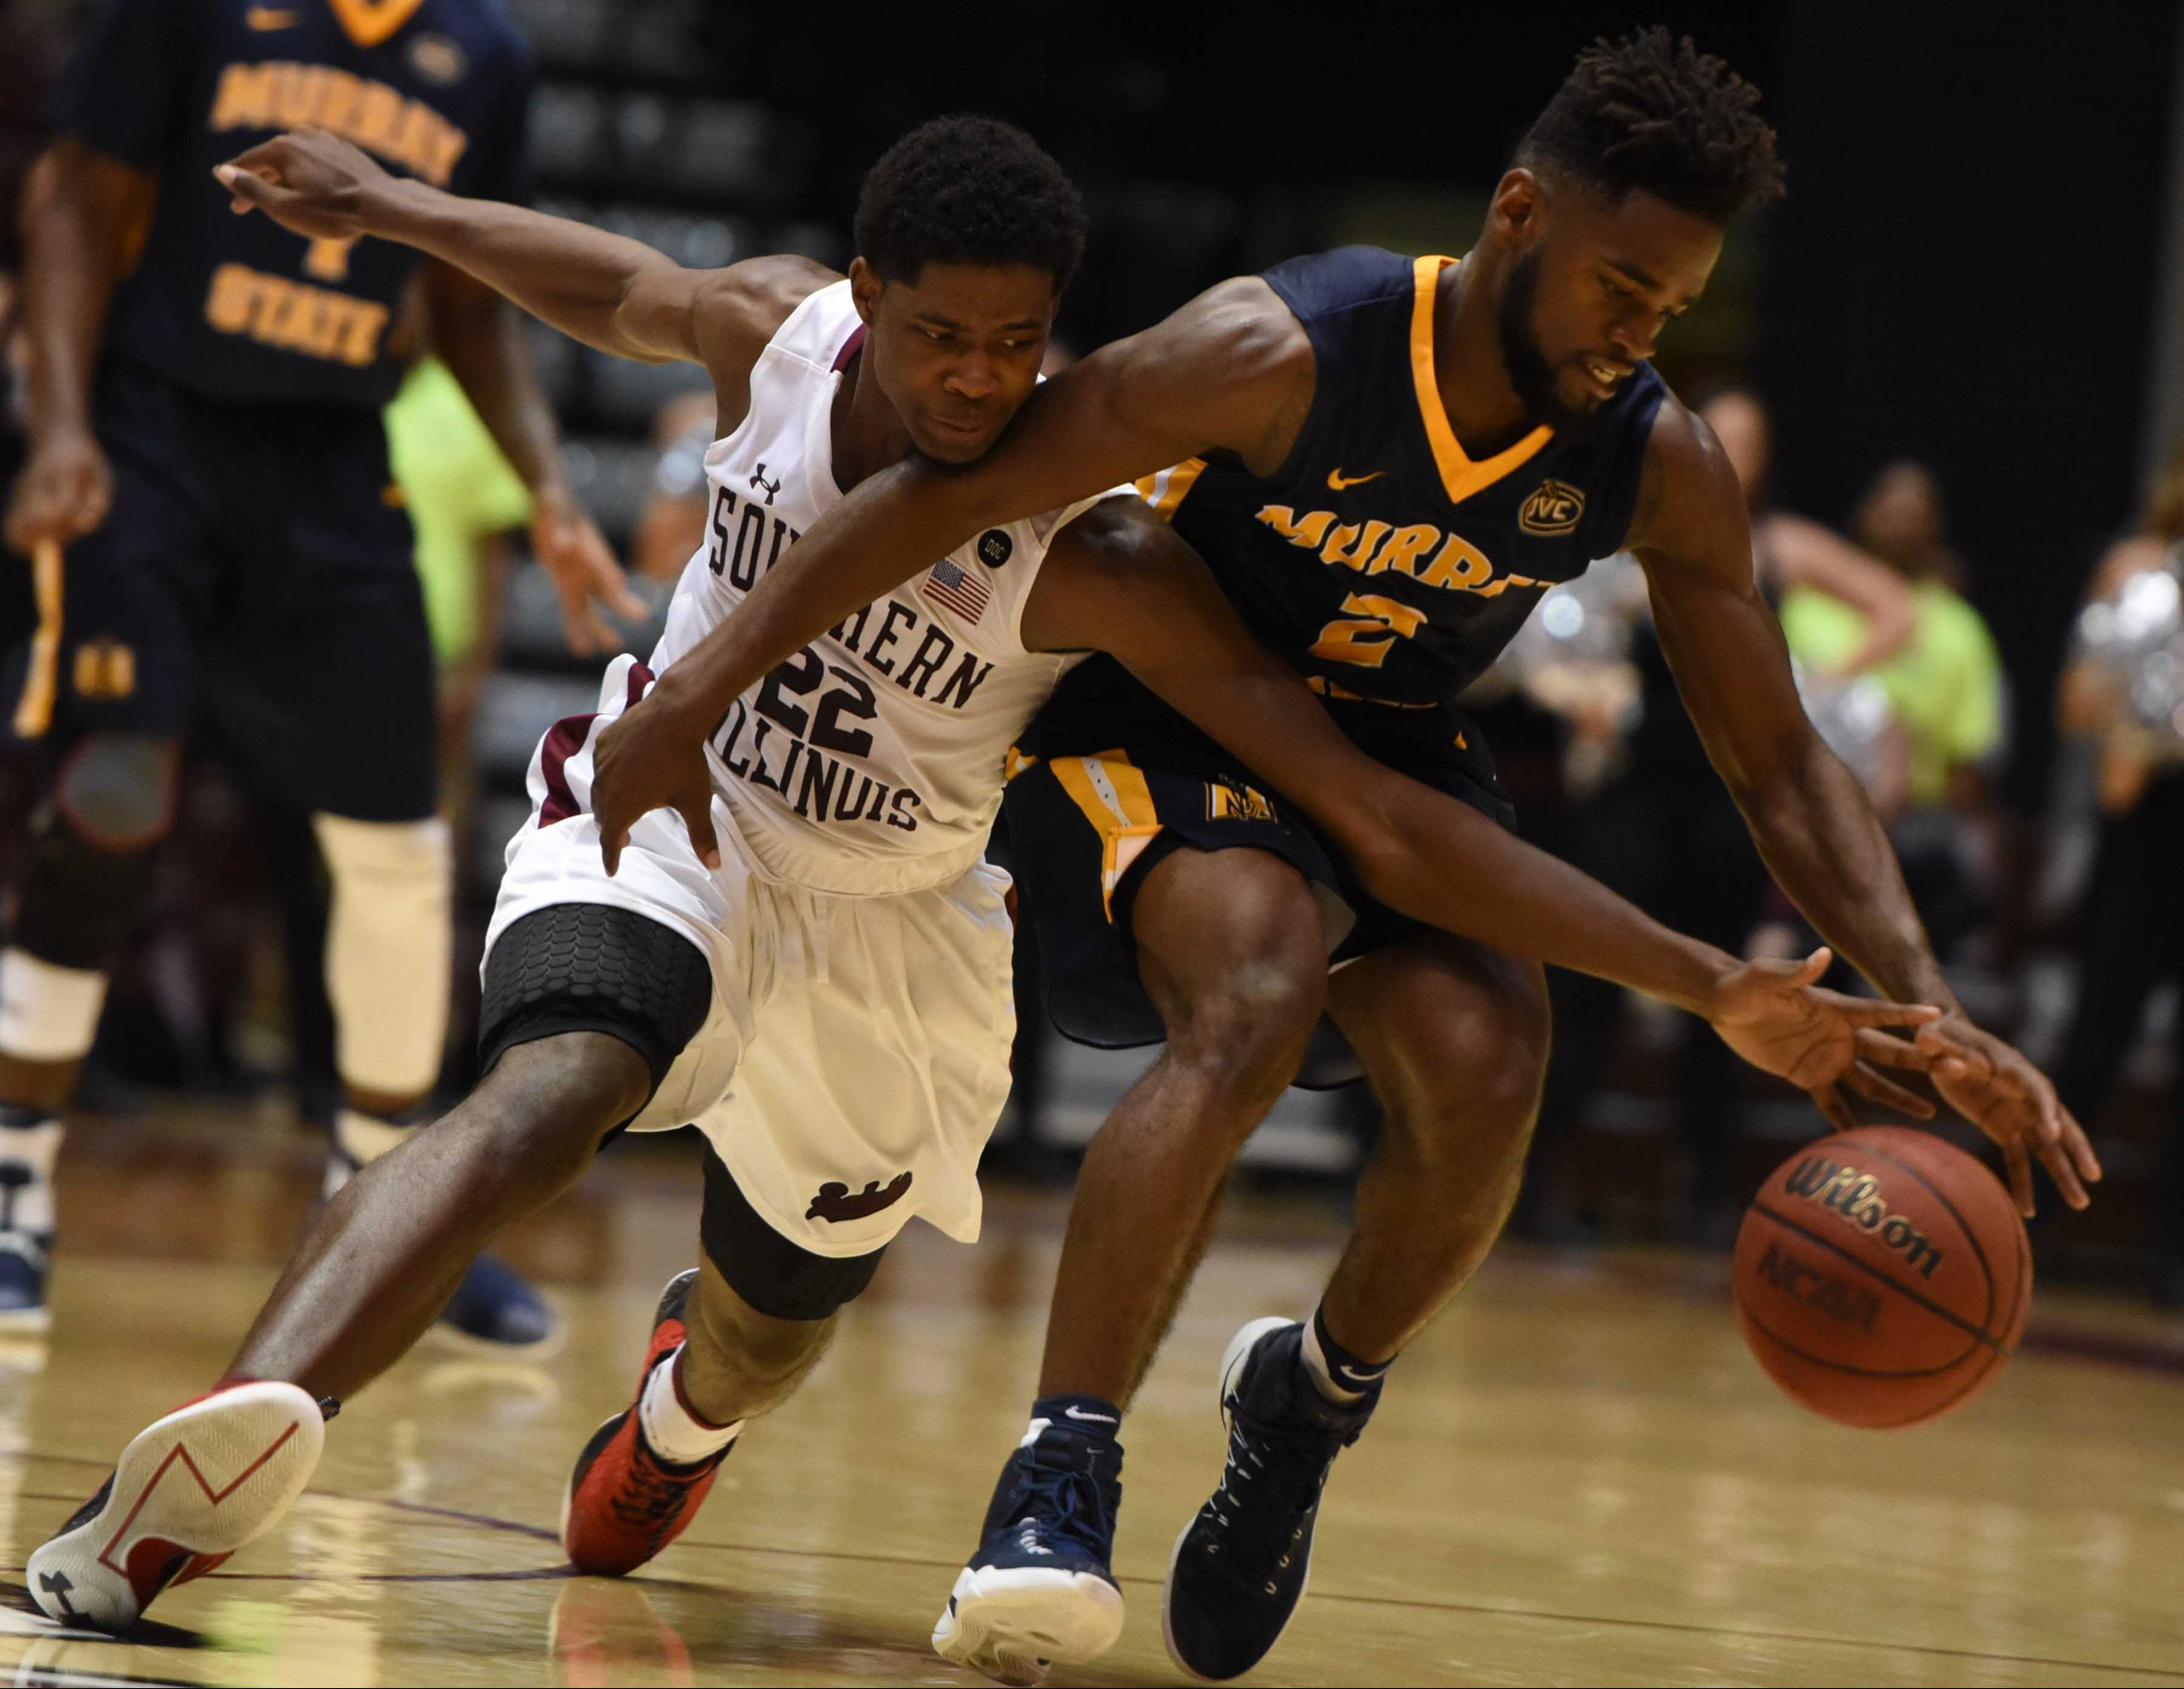 Saluki sophomore guard Armon Fletcher and Racer junior guard Jonathan Stark race for a loose ball Tuesday, Nov. 29, 2016, during SIU's 89-85 overtime win against Murray State at SIU Arena. (Bill Lukitsch | @lukitsbill)